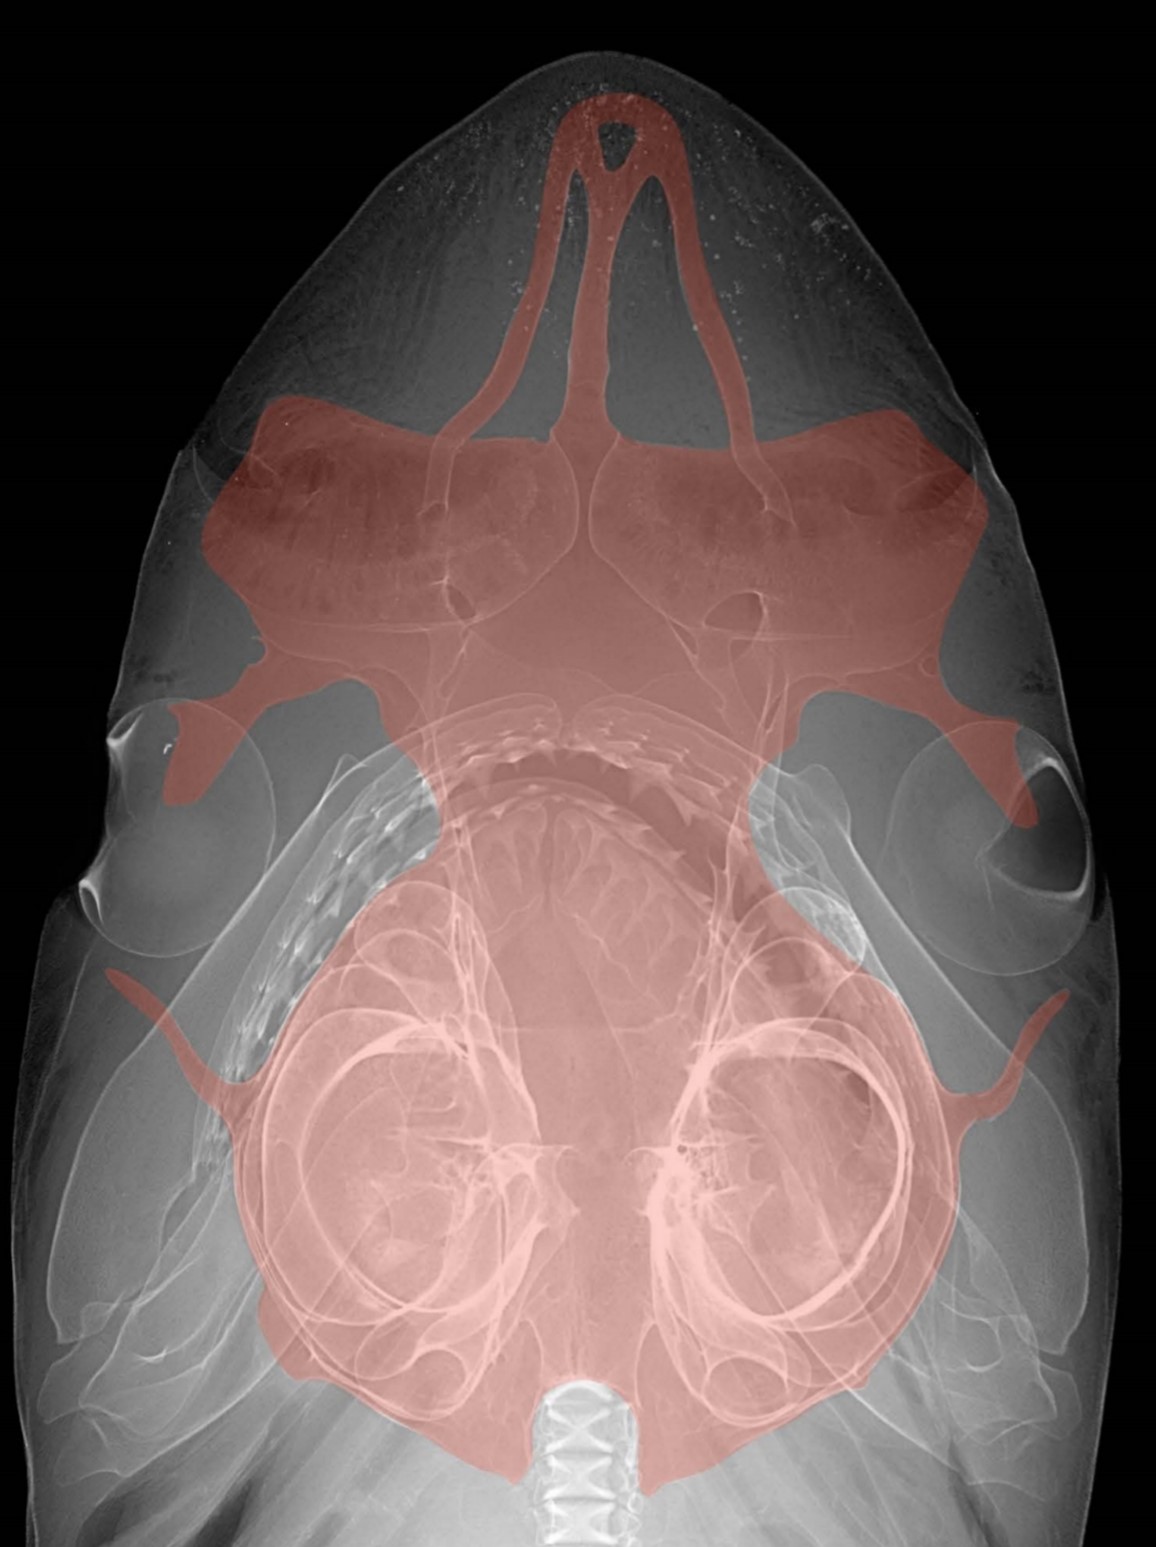 An X-ray like image of a shark’s head. The shark’s skull is digitally highlighted in red.